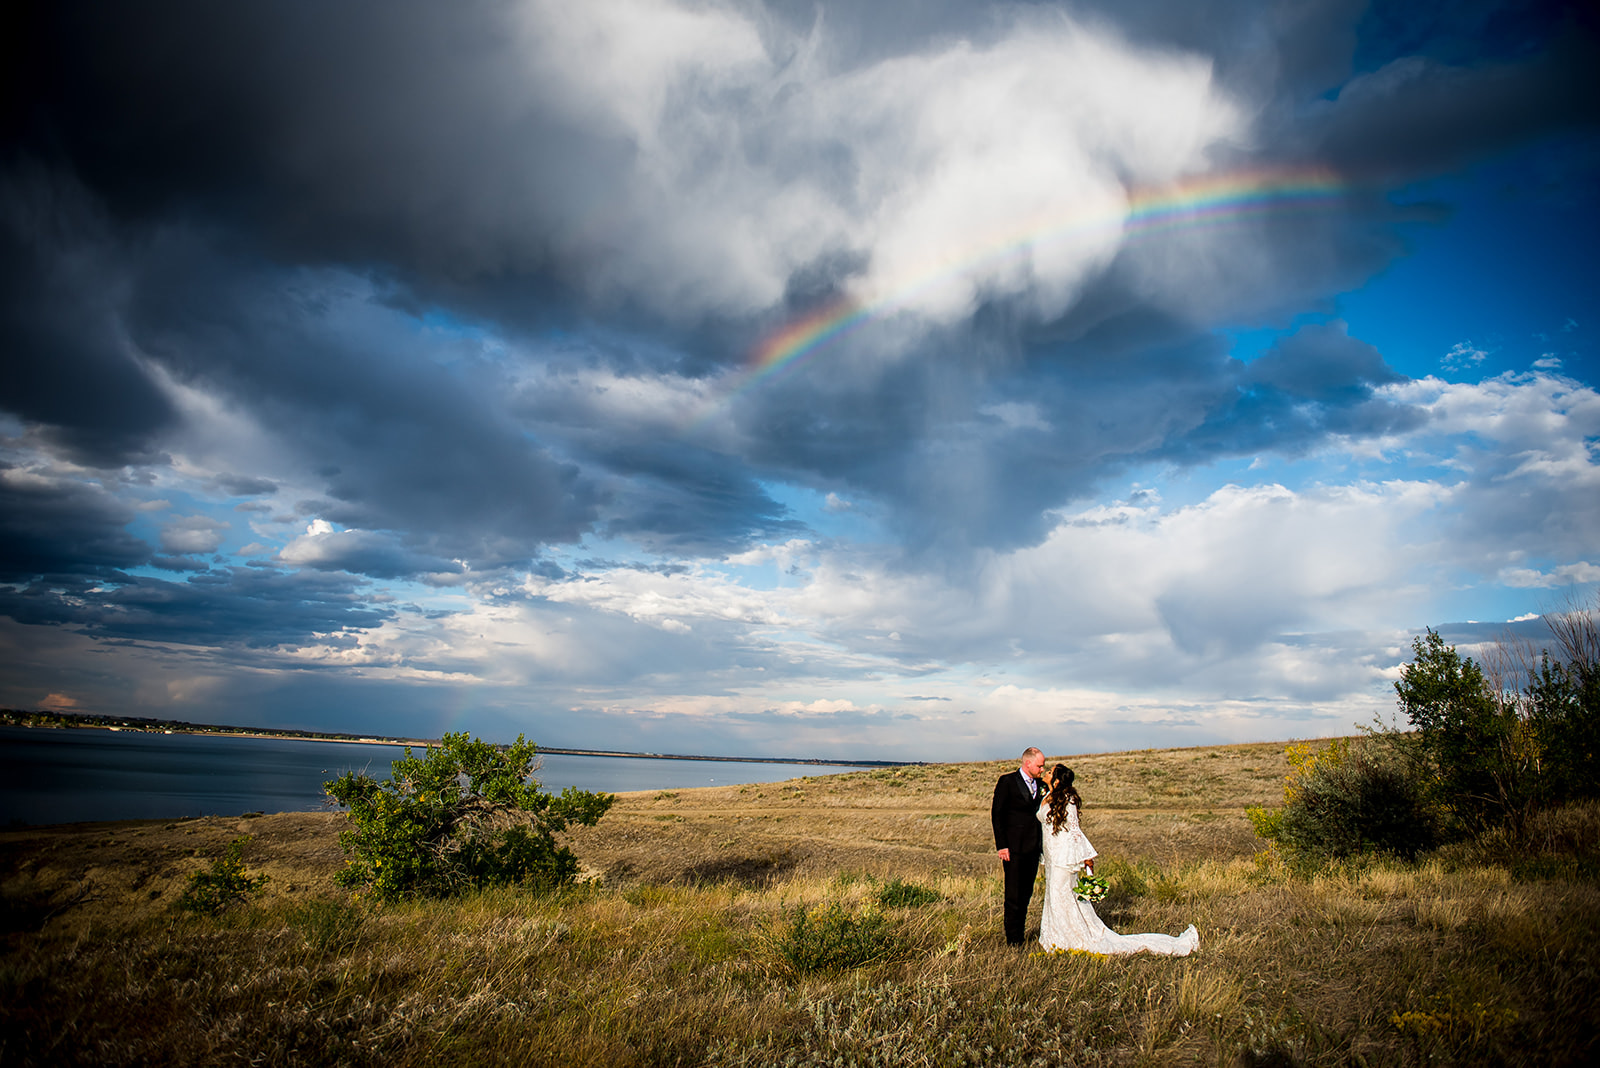 Couple stands facing each other in field with cinematic clouds and a rainbow in the background.